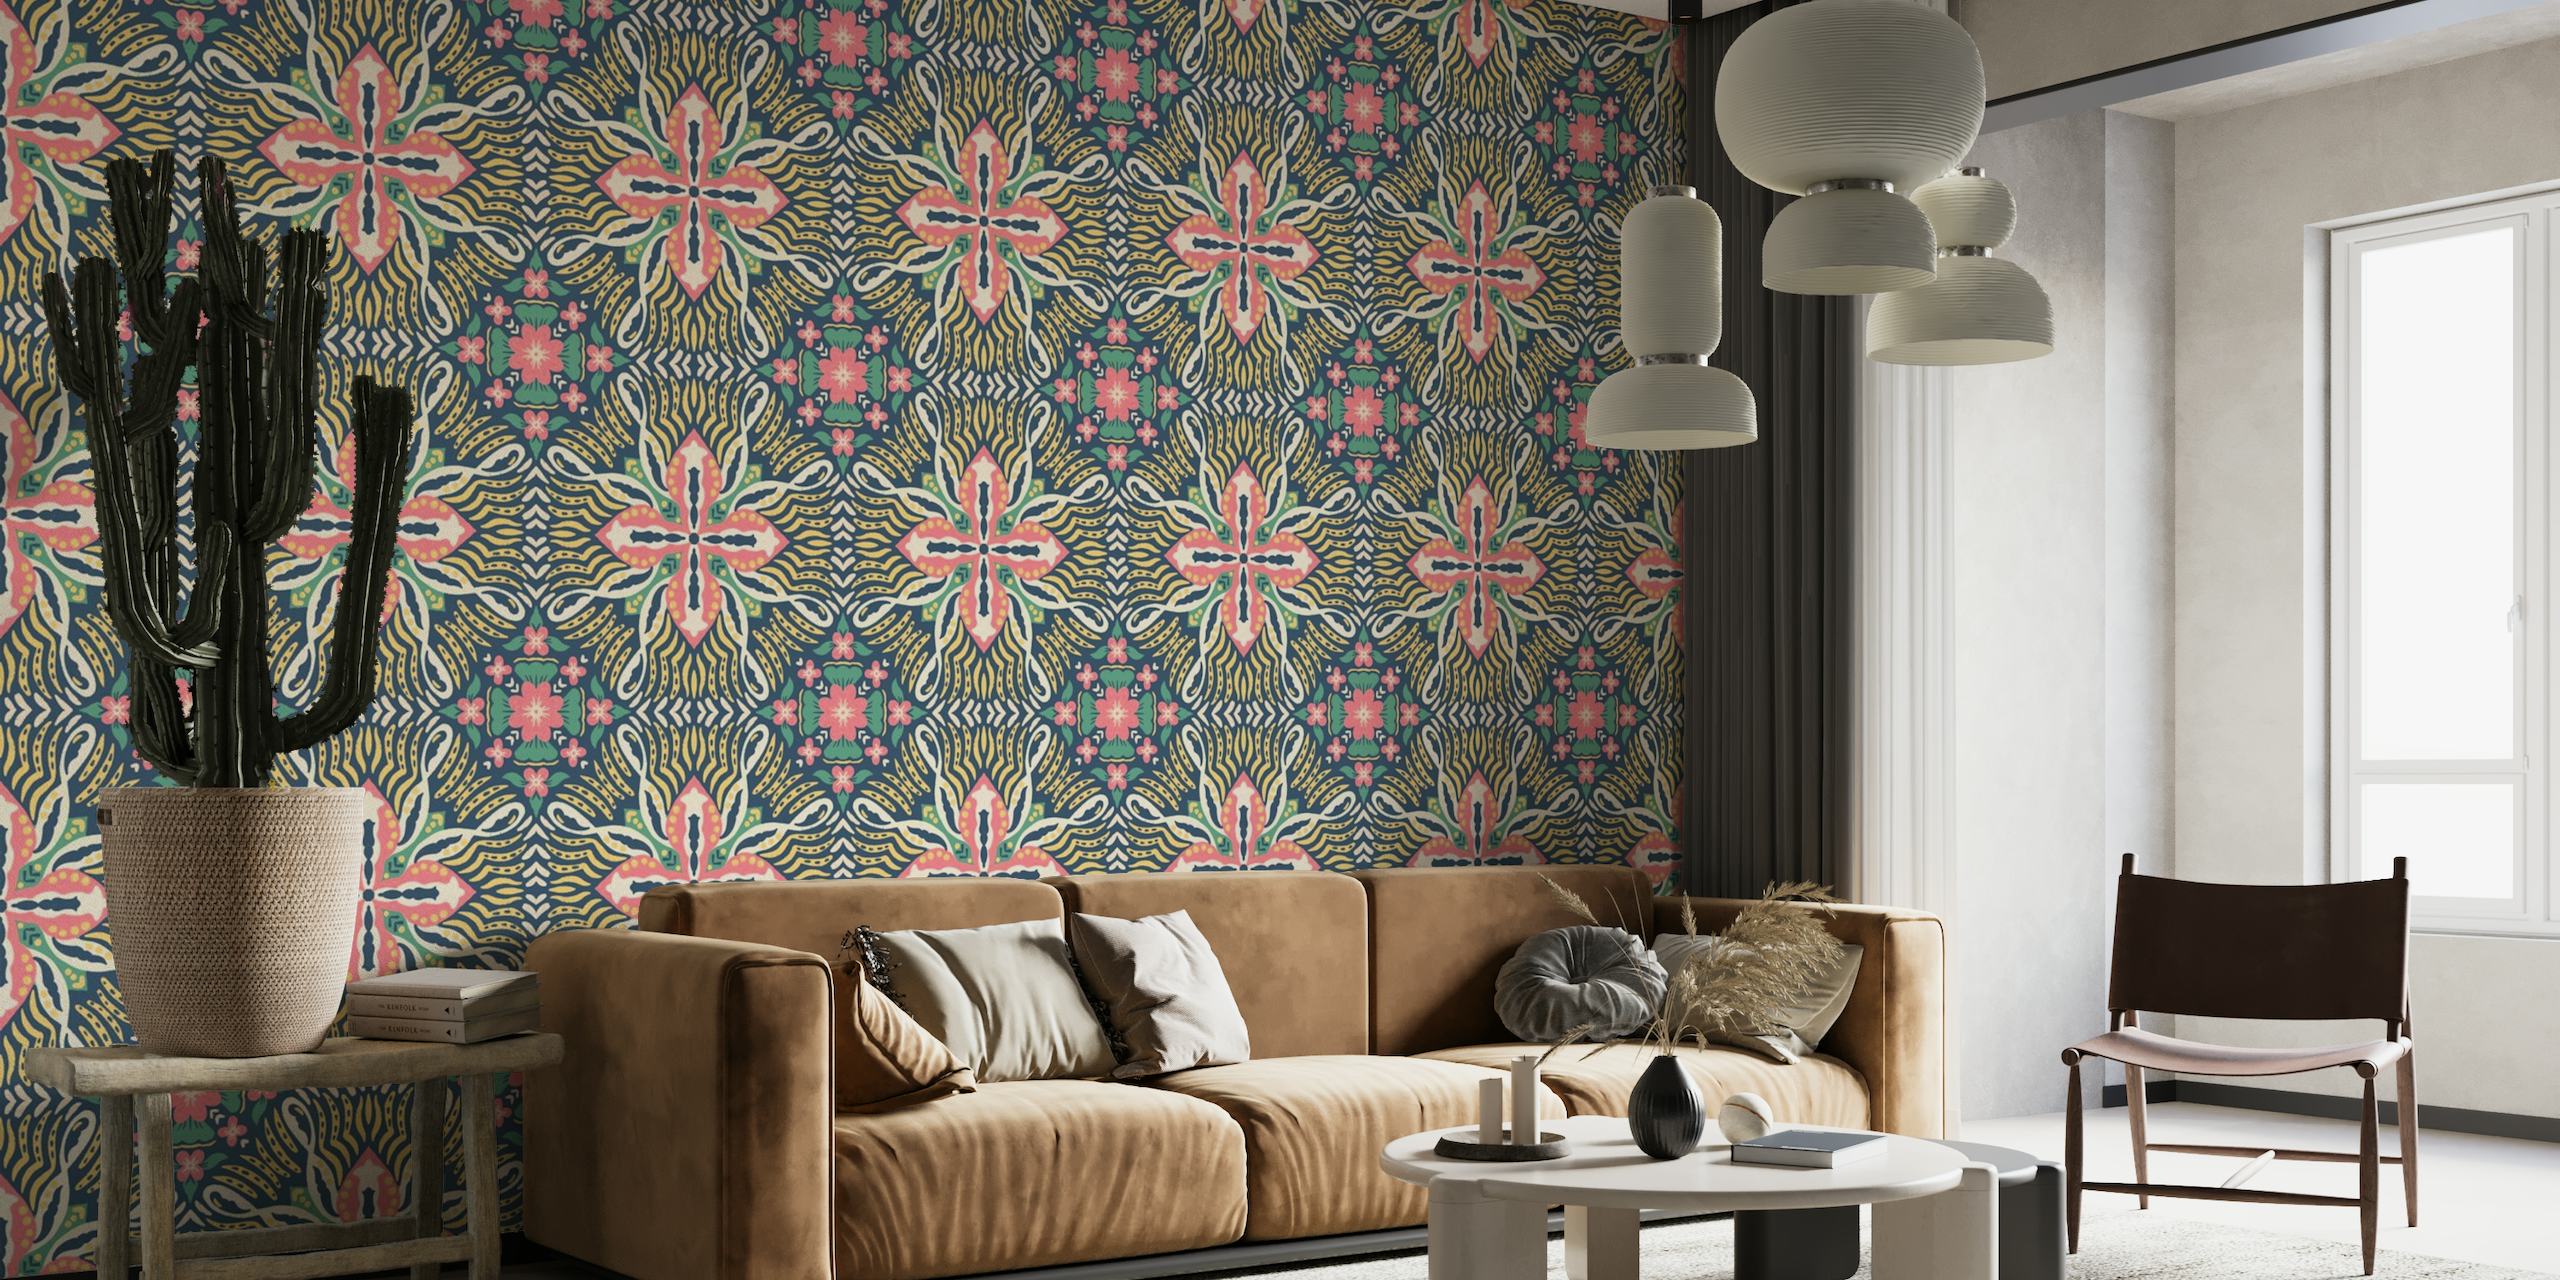 Colourful, symmetric pattern with a playful roller coaster theme for wall mural